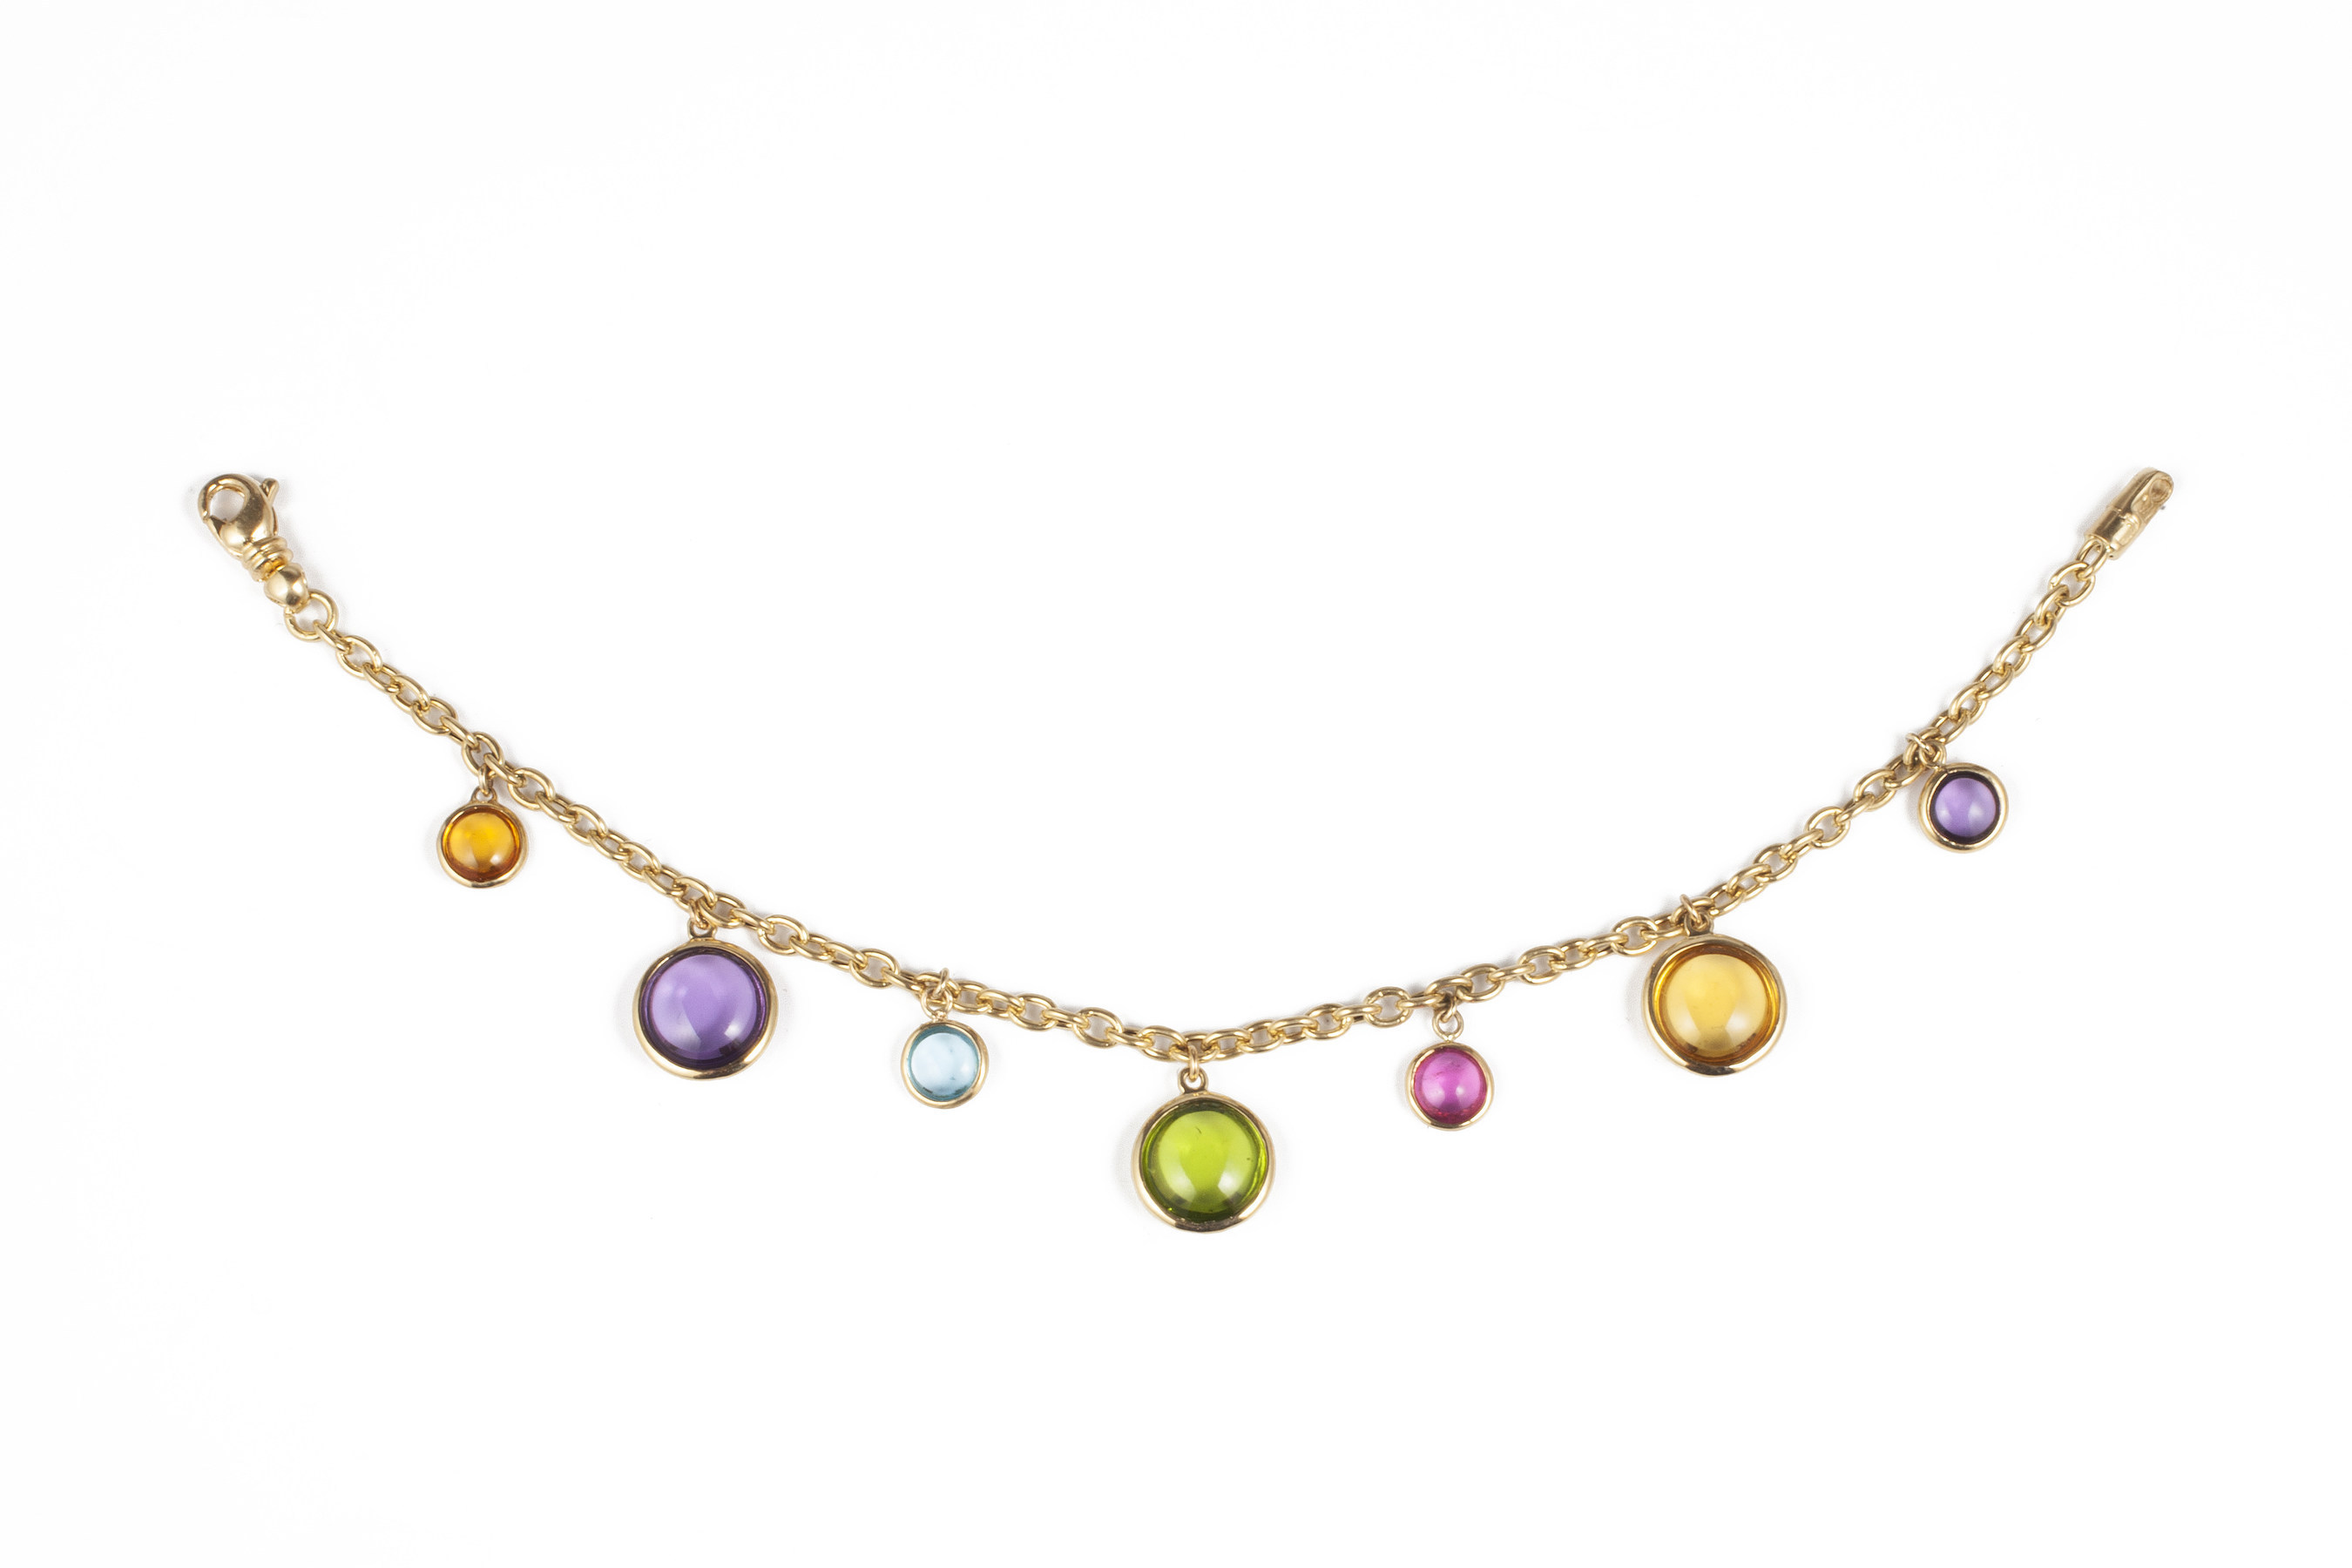 Jewelers Of America Presents 2014 Holiday Gift Guide